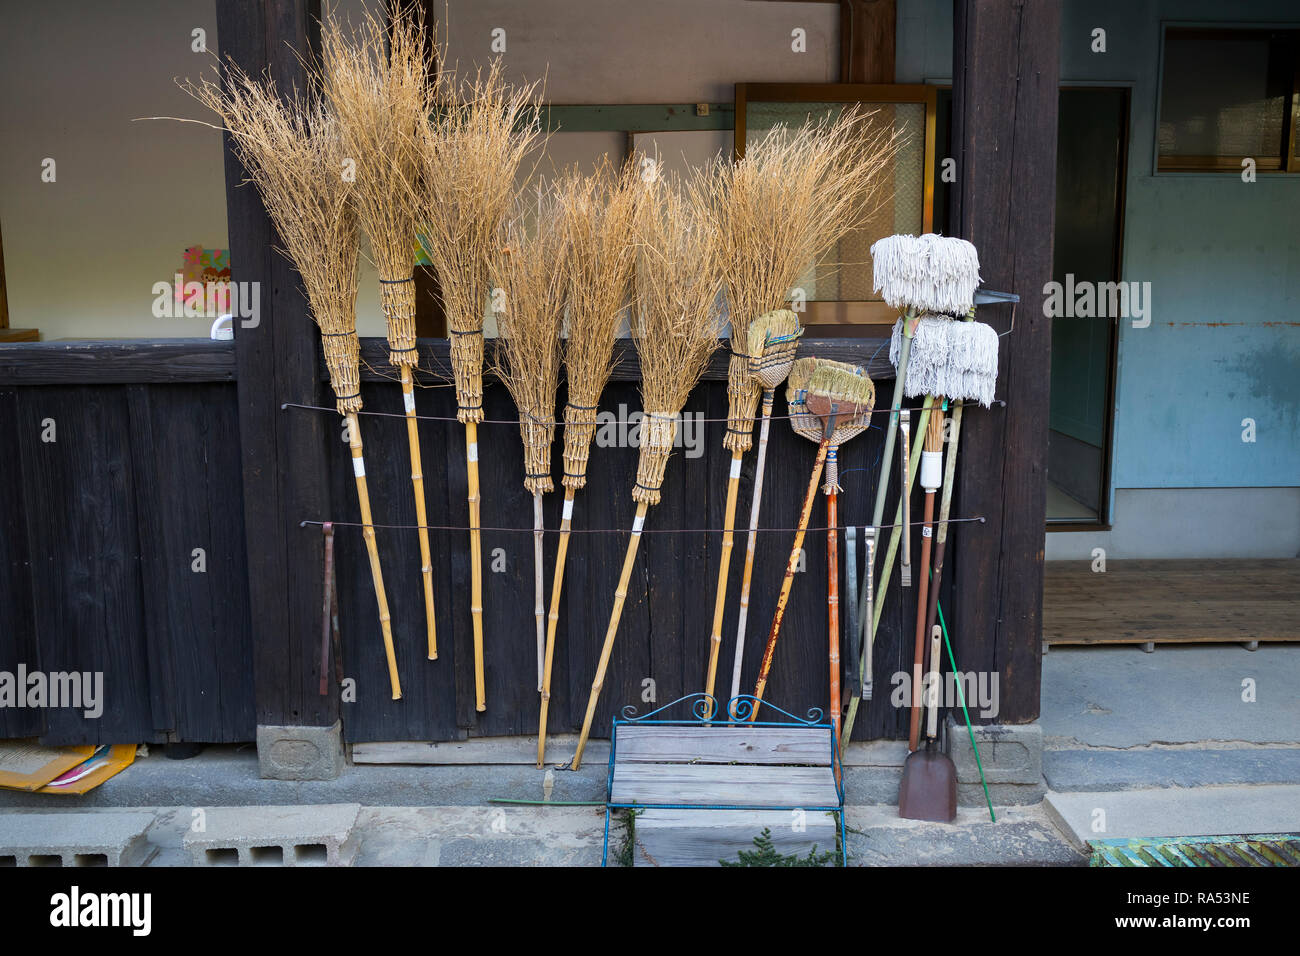 Nagasaki, Japan - October 24, 2018: Traditional straw brooms to clean and maintain the temple grounds Stock Photo